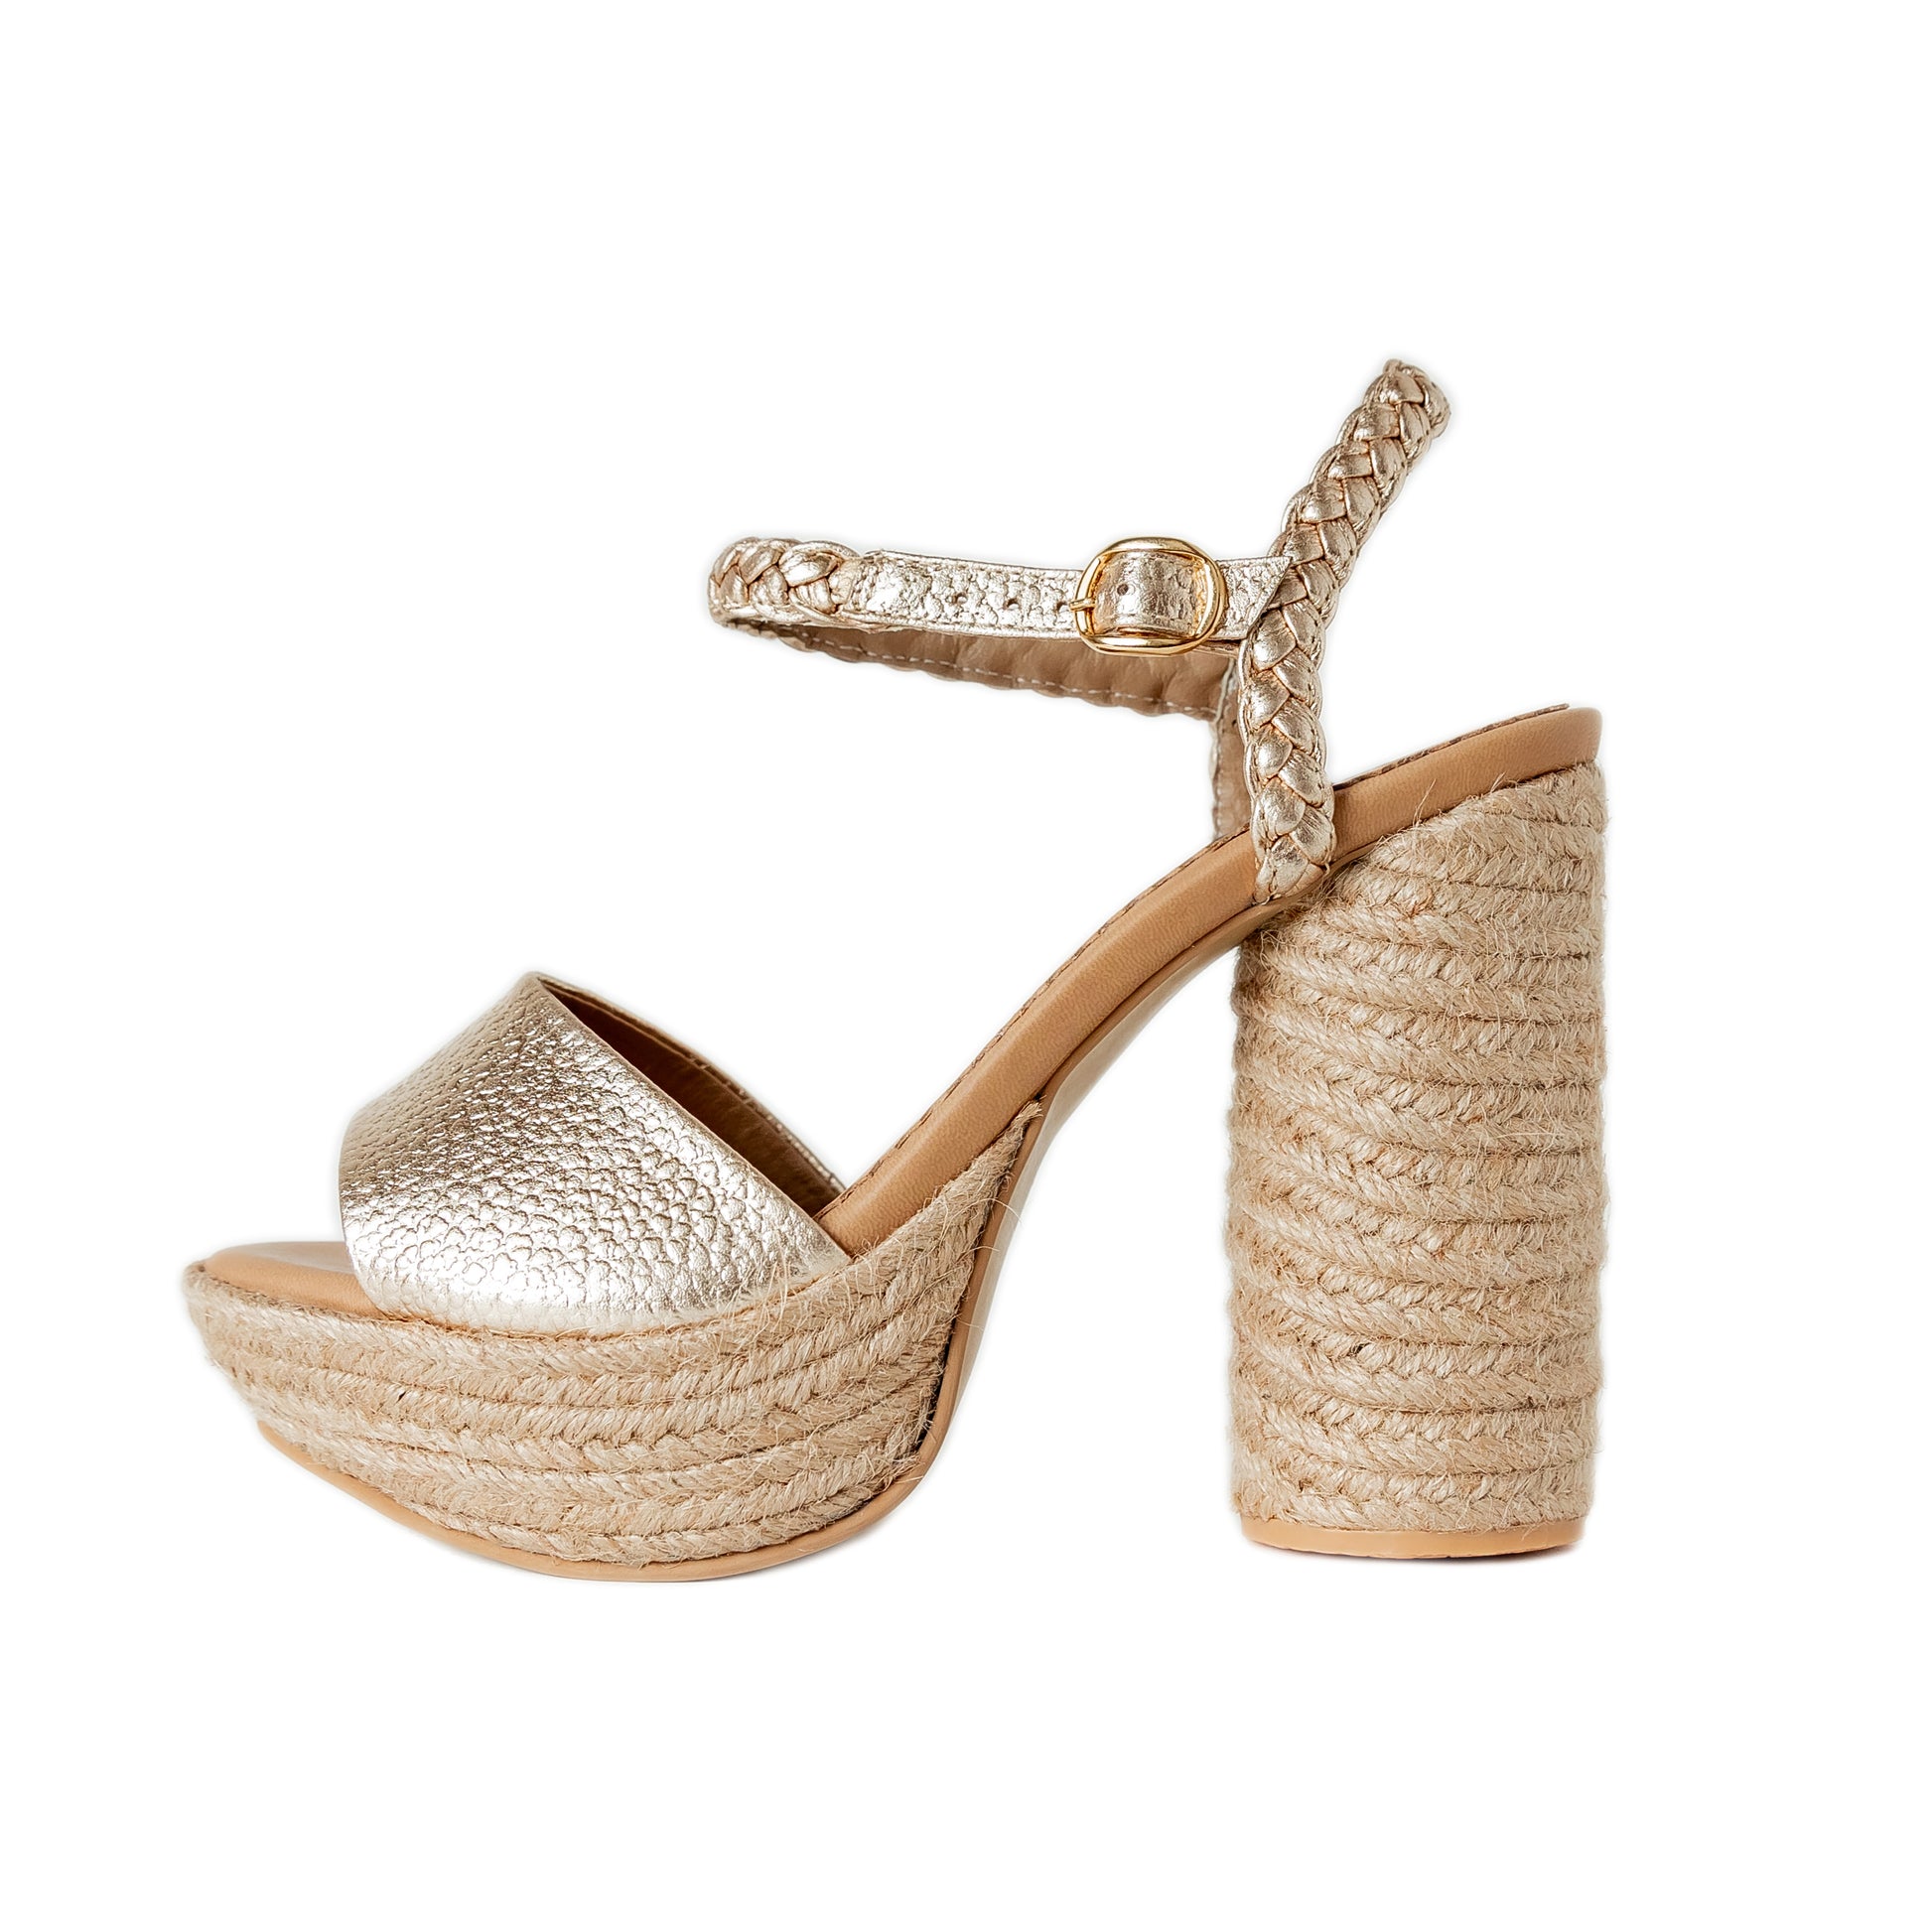 Eugene Gold Sandals by Nataly Mendez Platform made of jute Leather upper Adjustable Insole made of leather Hand made 5 inch heel height 1,5 inch platform